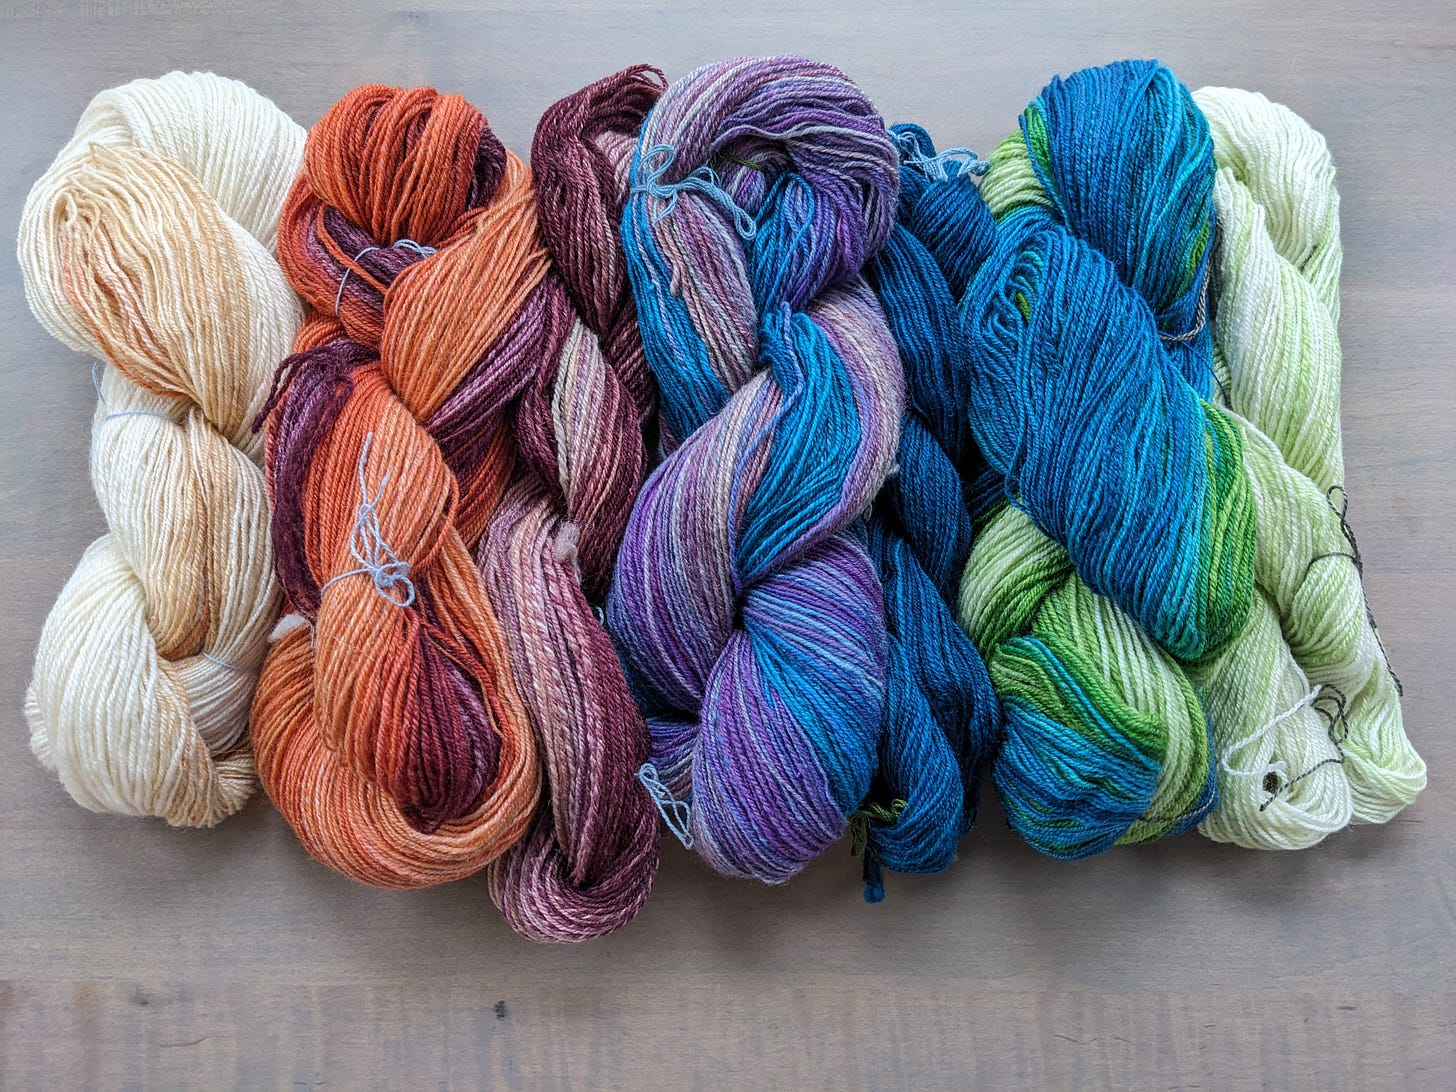 A series six skeins of yarn in a gradient from cream to orange to purple to blue to teal to green to cream.